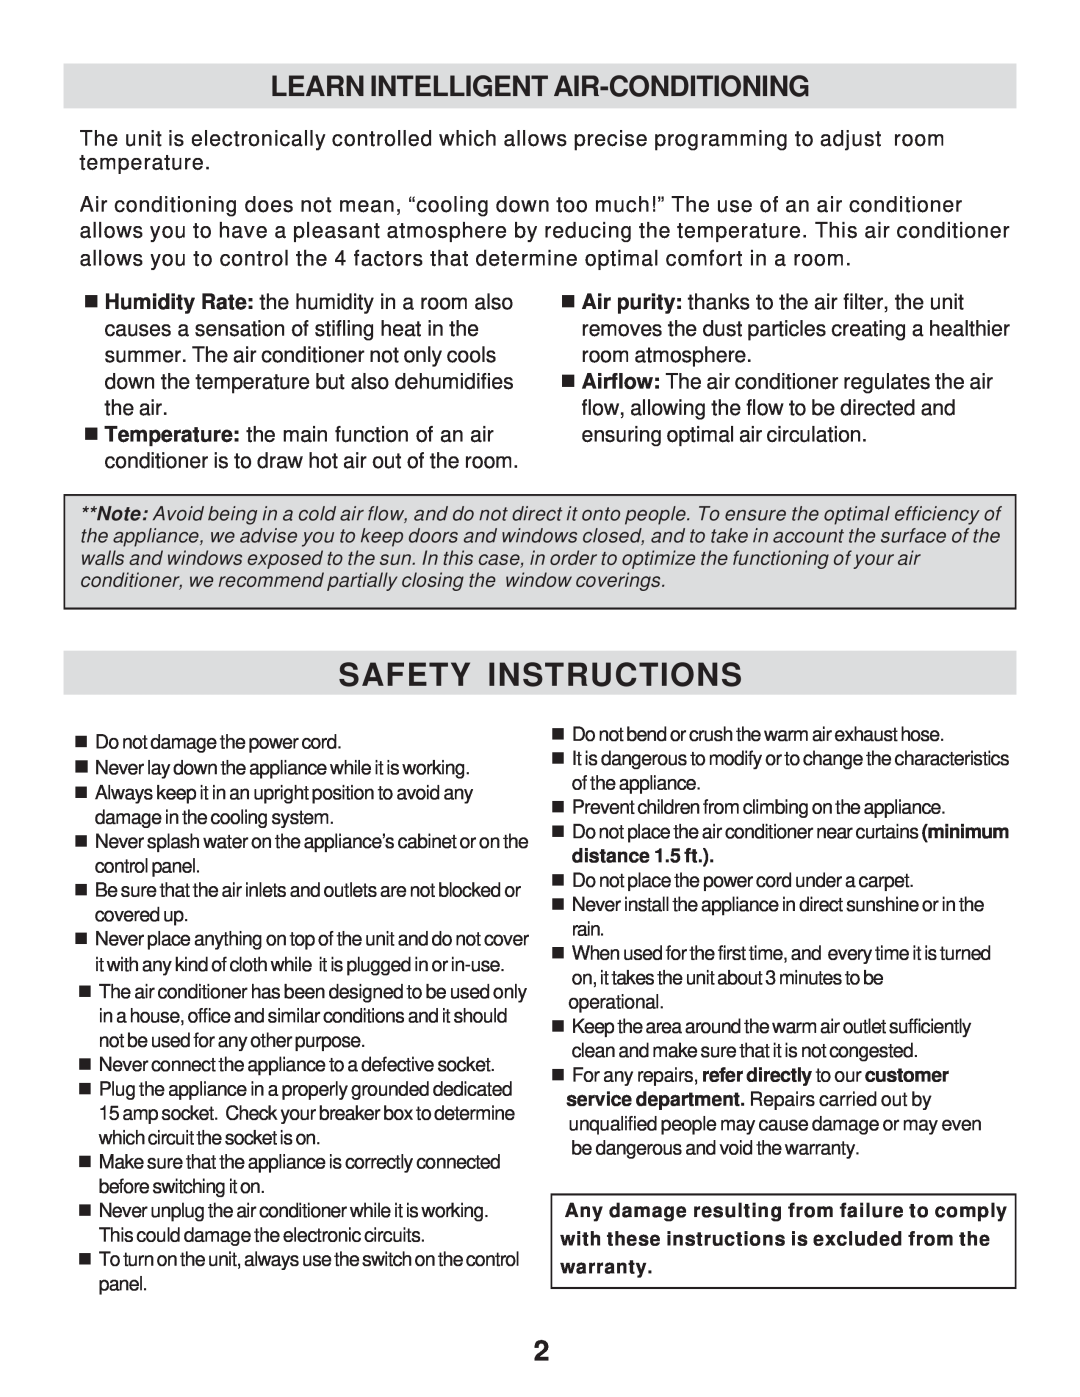 WindChaser Products PACR9S manual Safety Instructions, Learn Intelligent Air-Conditioning 